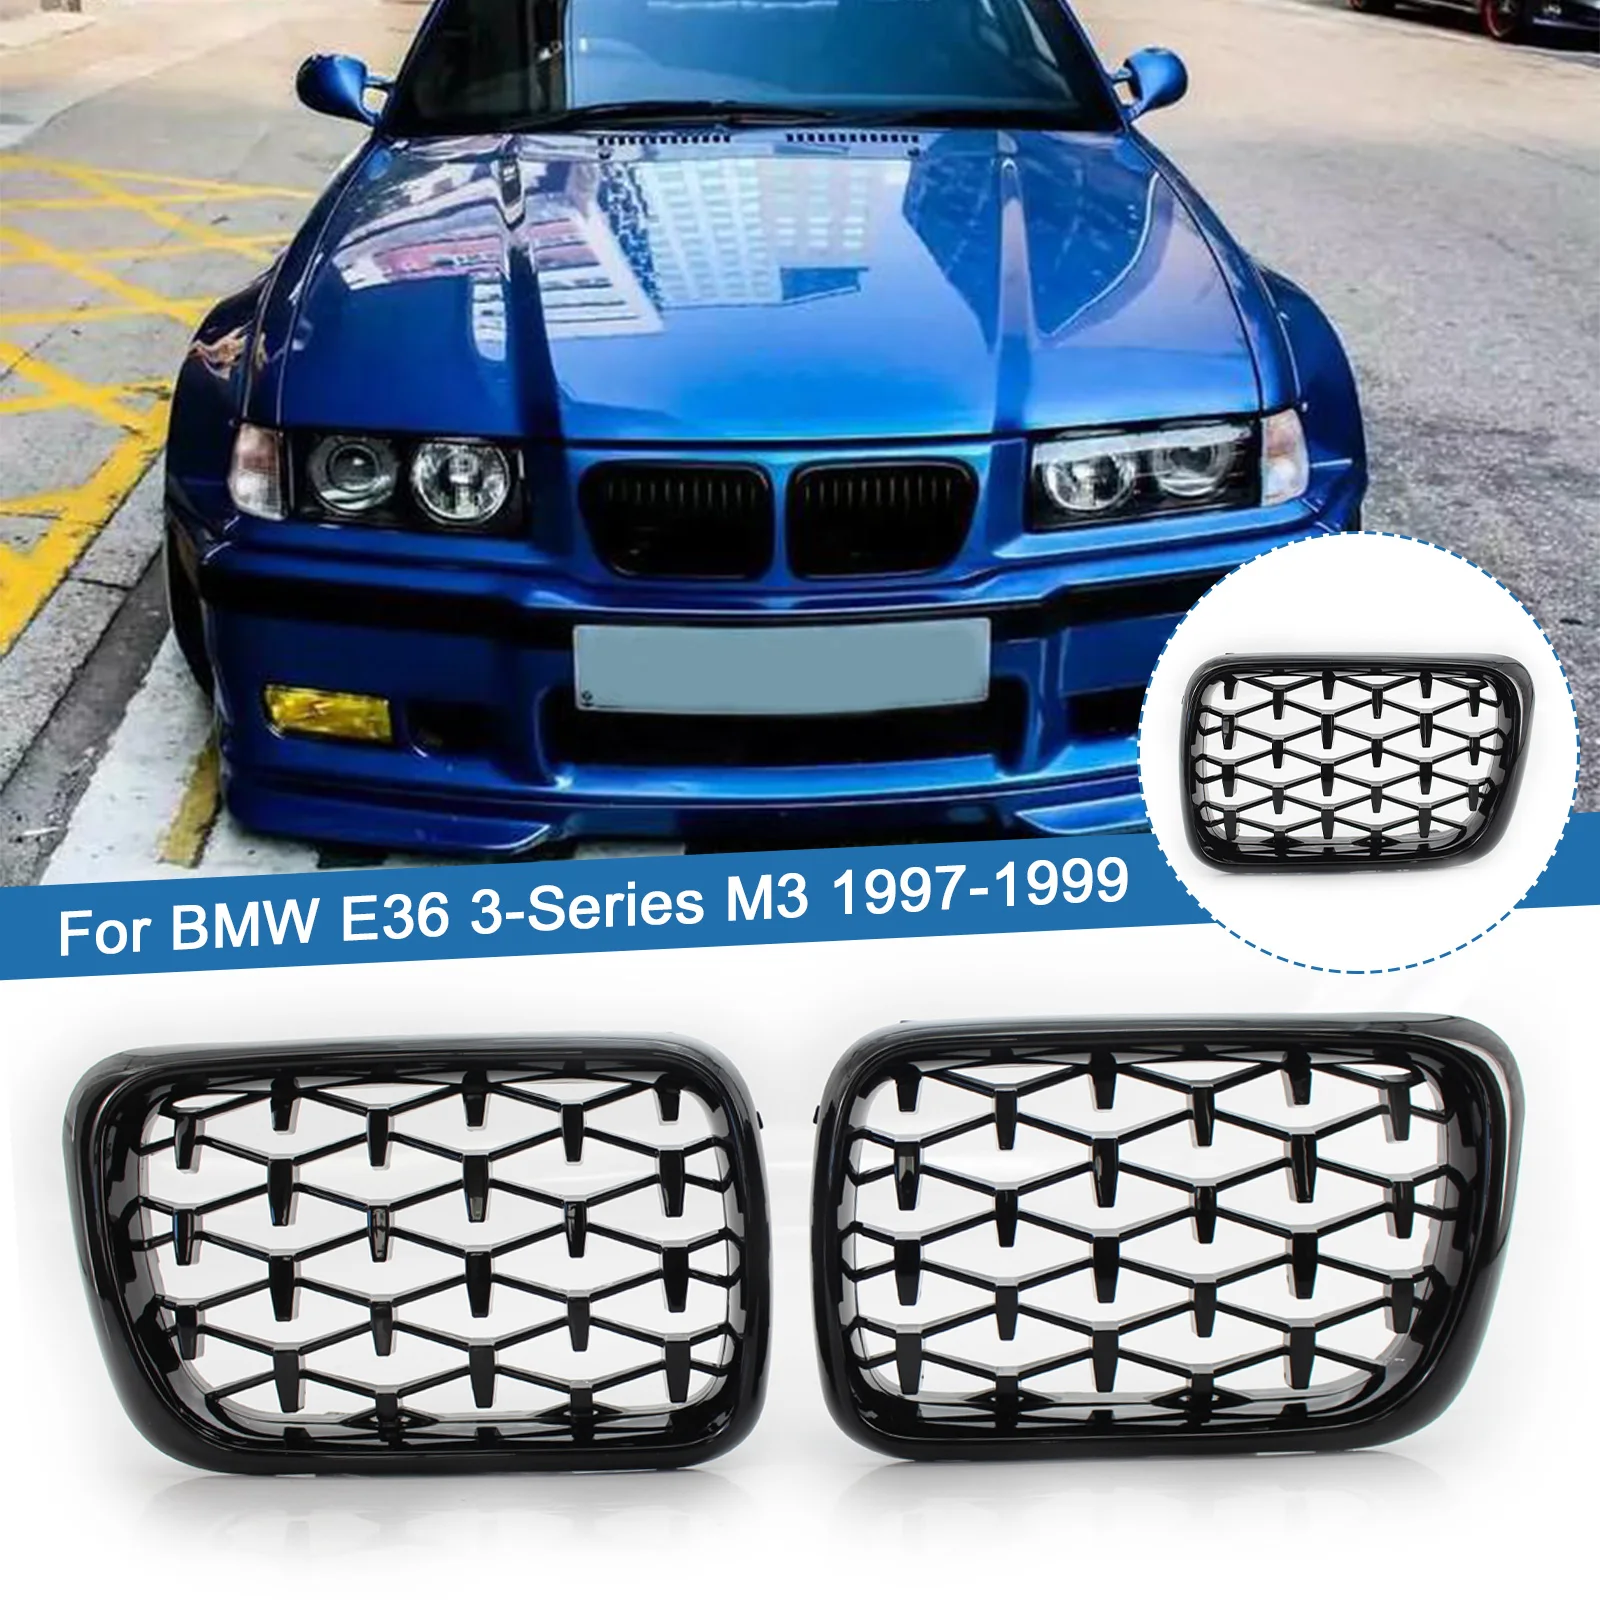 1 Pair Gloss Black Car Front Kidney Bumper Grilles Diamond Style Racing Grills For BMW E36 3 Series 318I 323I 328I M3 1997-1999